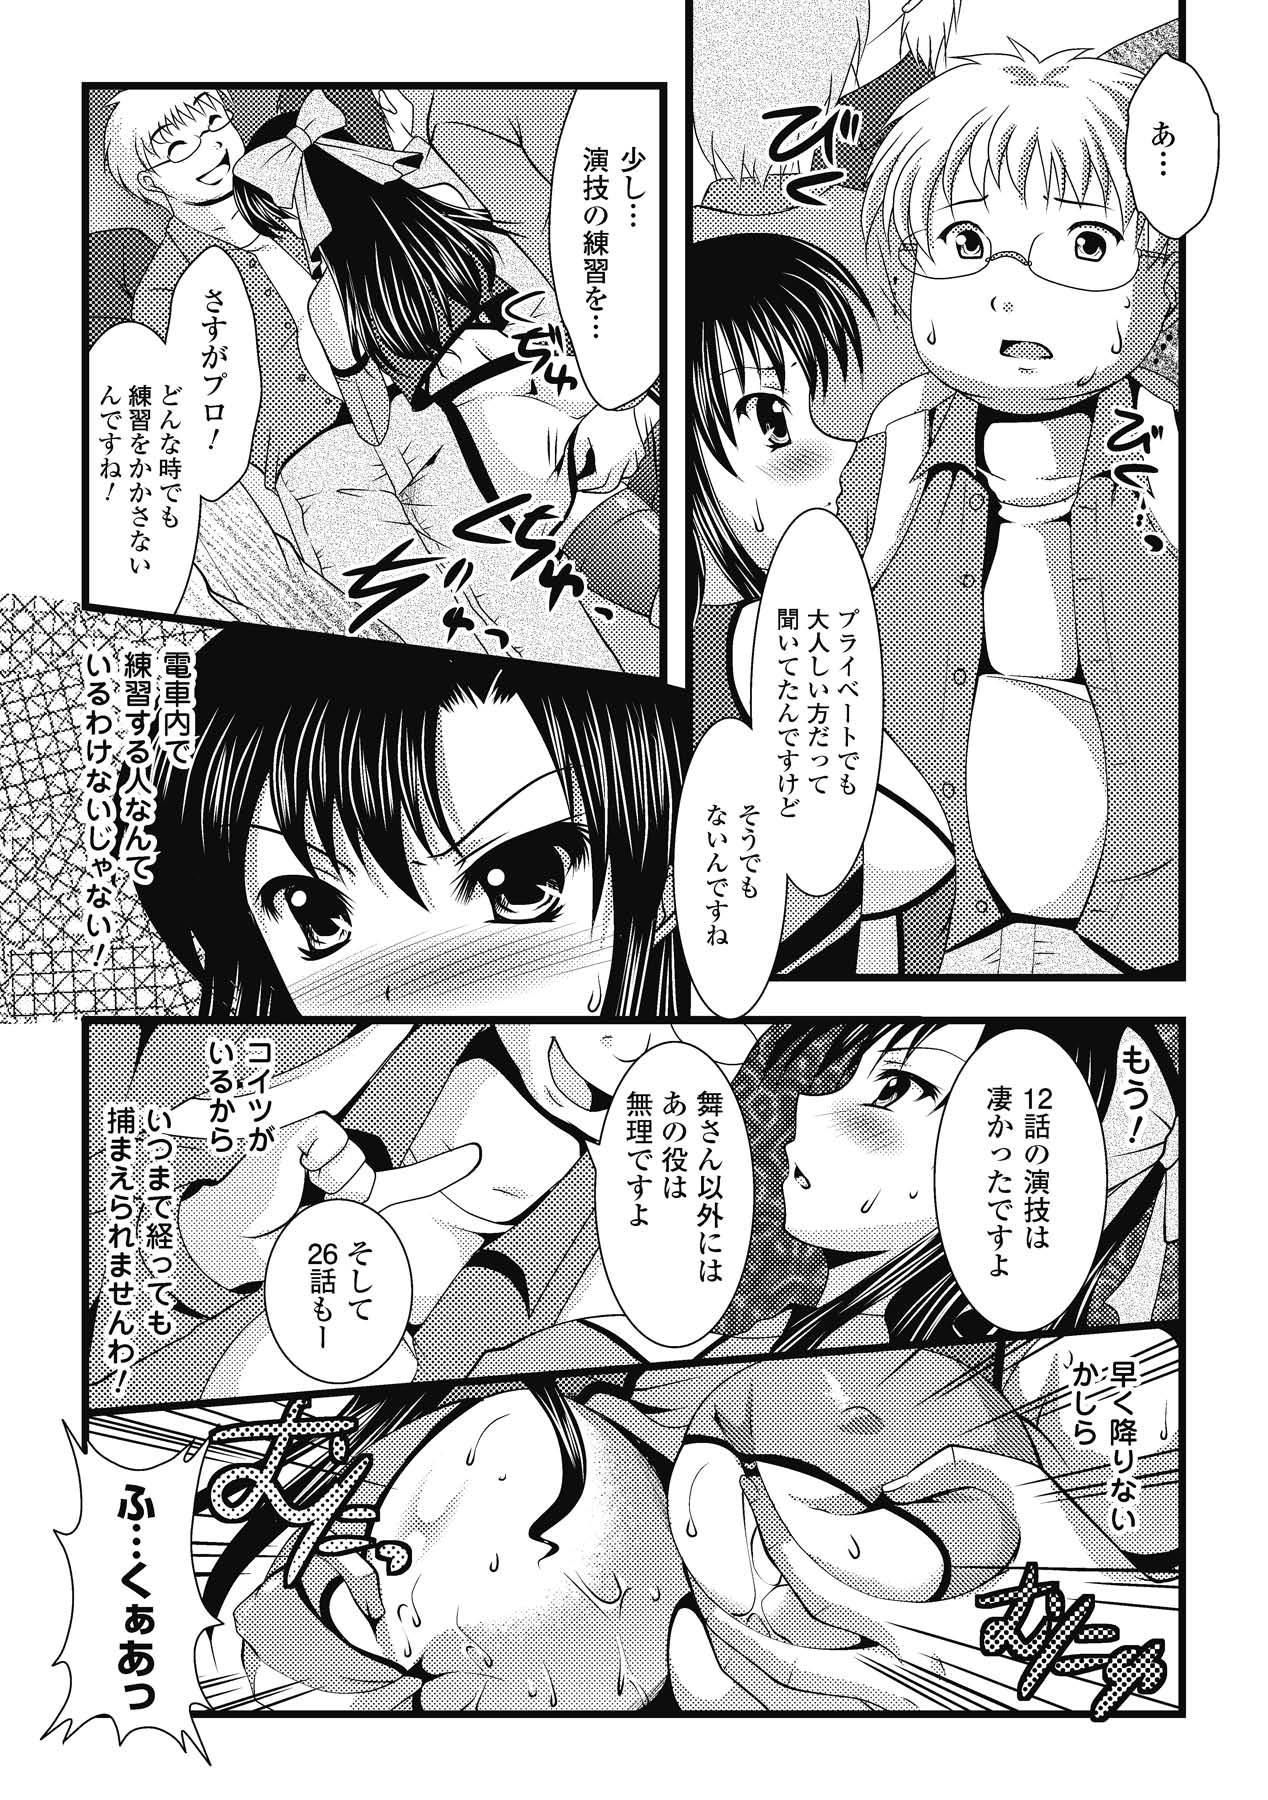 Room EROcology - Suisei tenshi prima veil zwei Tight Cunt - Page 11